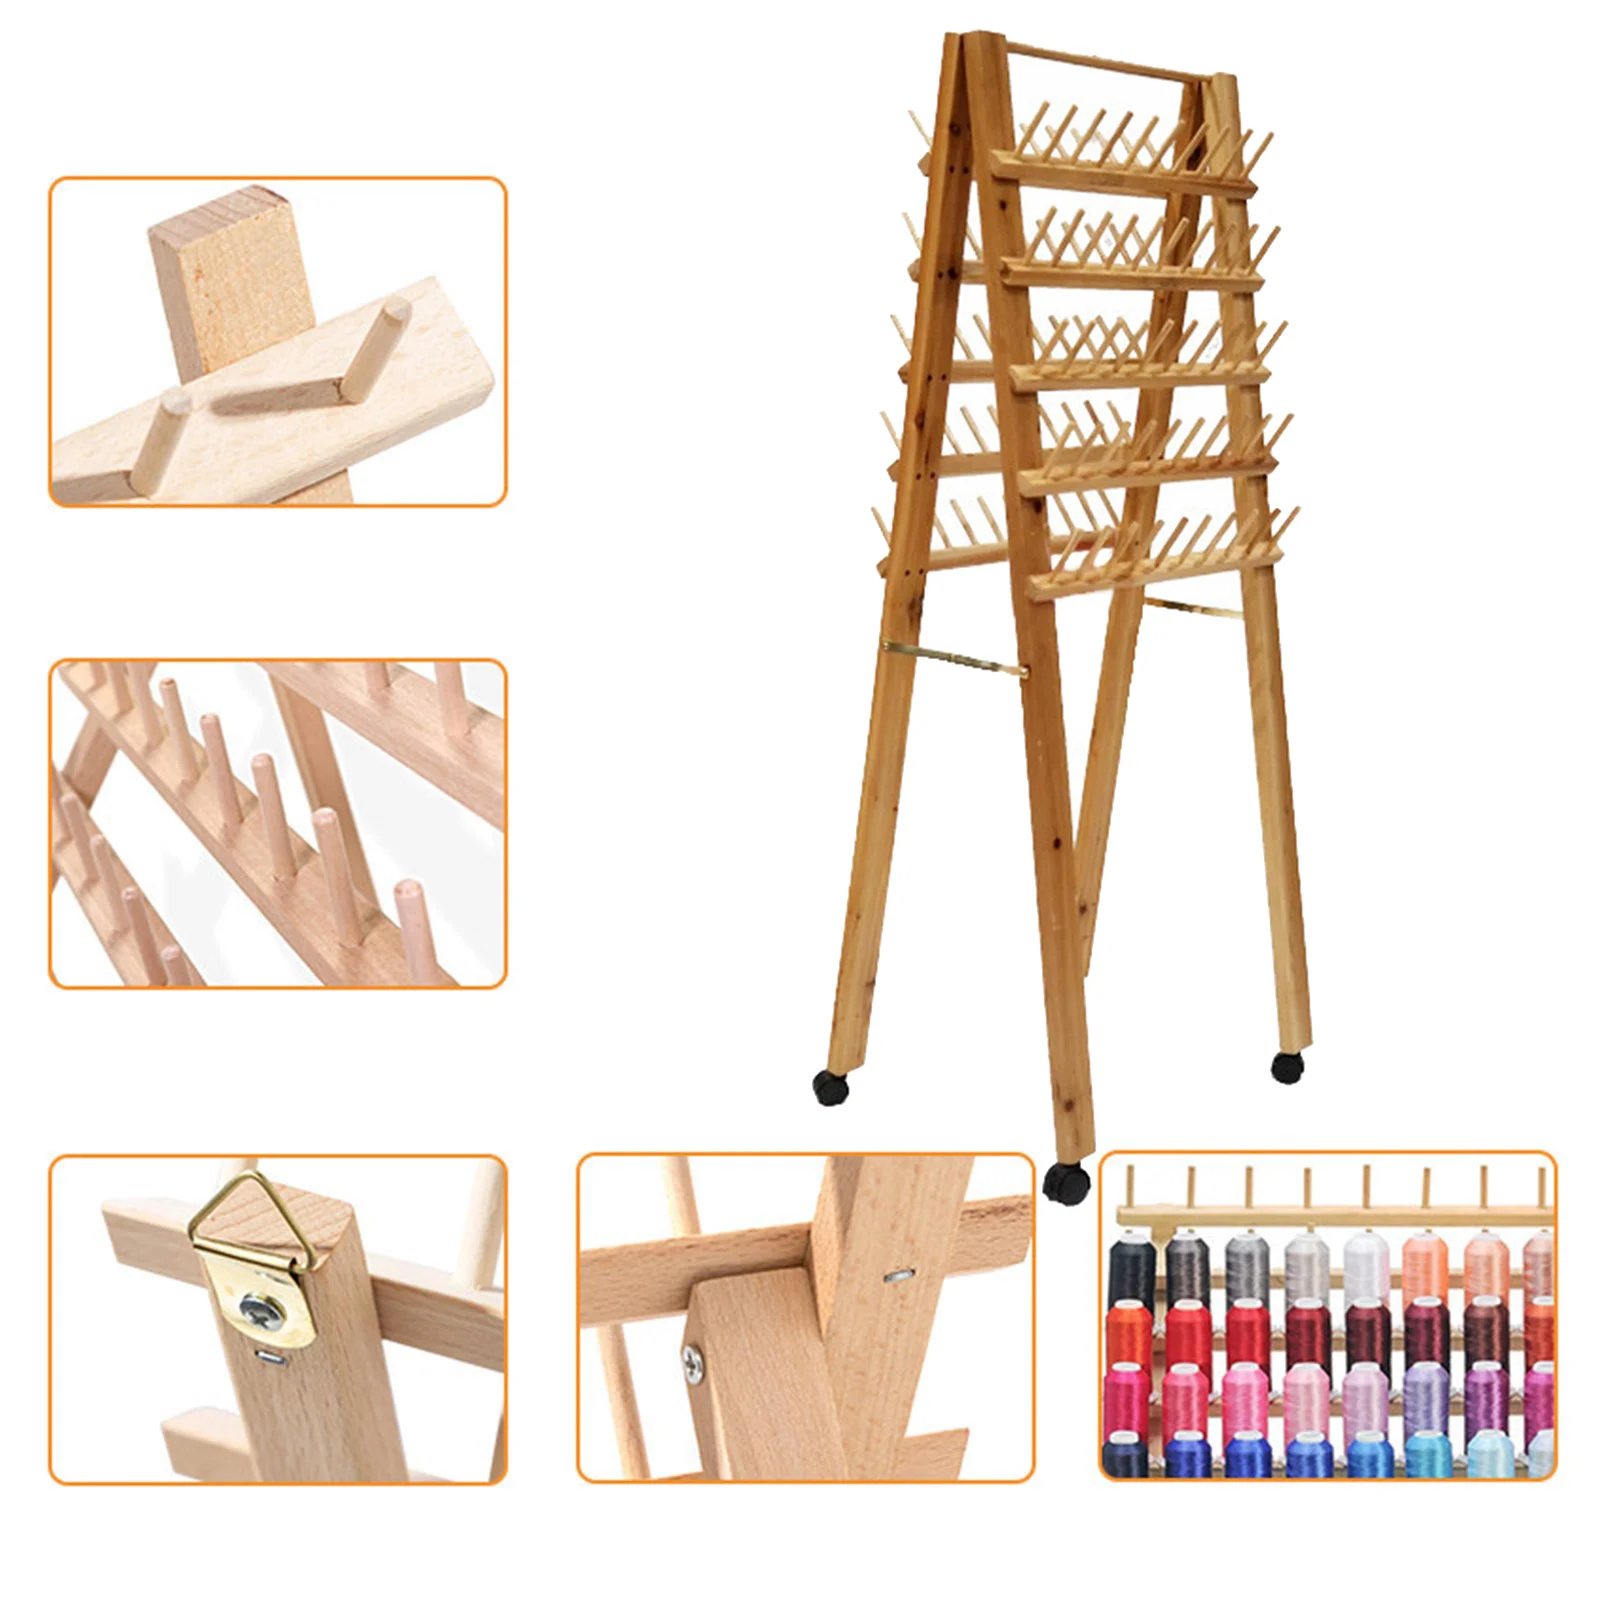 100 Spool Thread Rack Movable Wooden Thread Stand Holder Sewing Thread Organizer Embroidery Sewing Quilting Needle Accessories